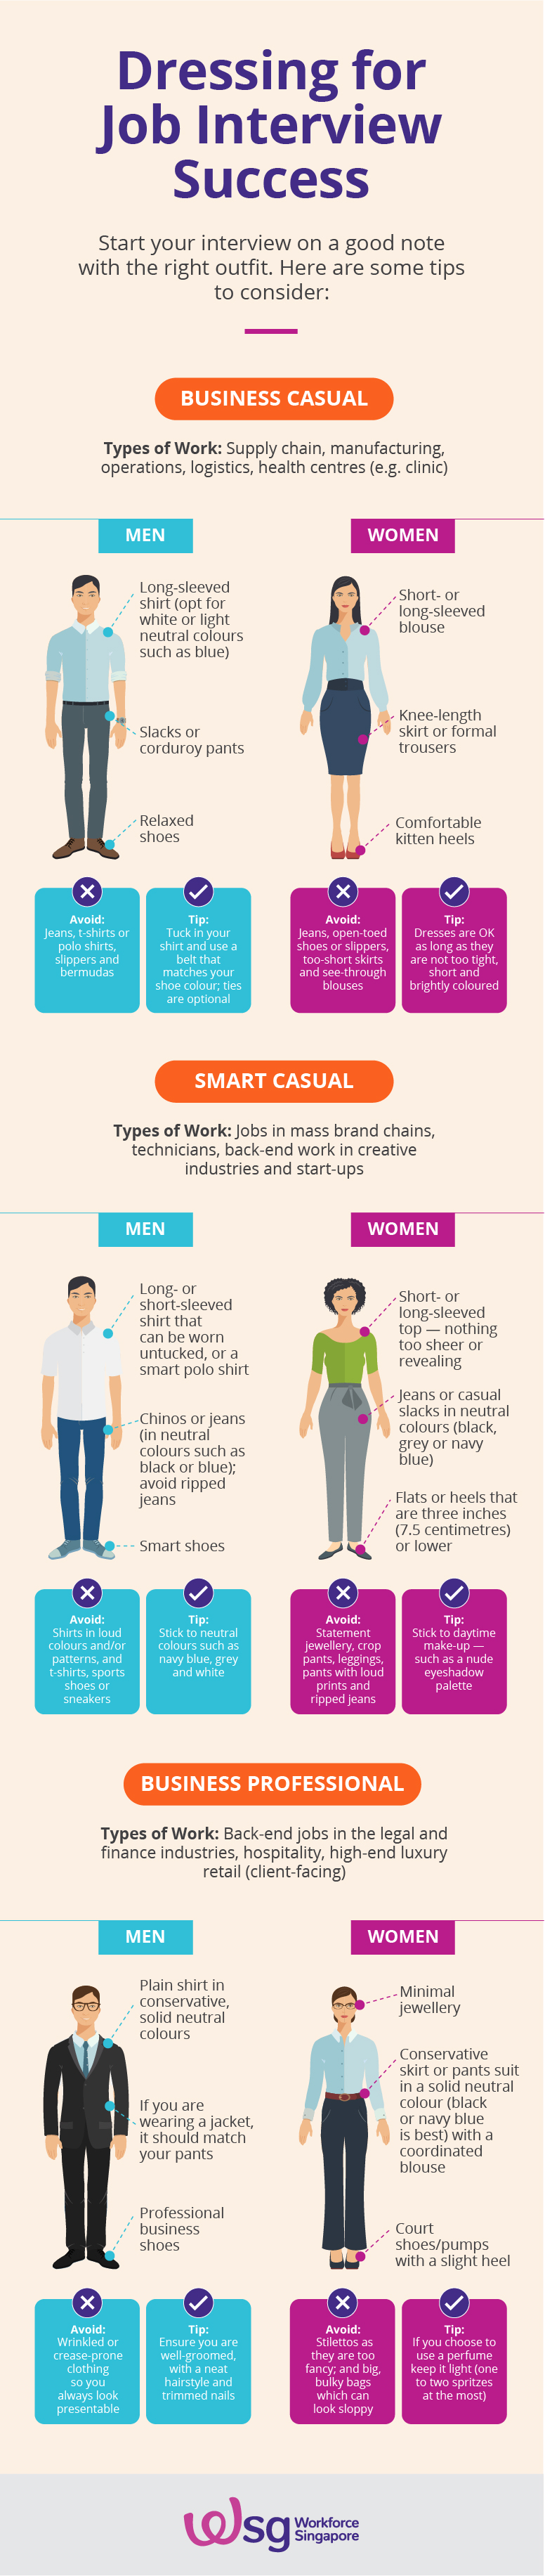 Dressing for Job Interview: How to Make a Great Impression | Workipedia ...